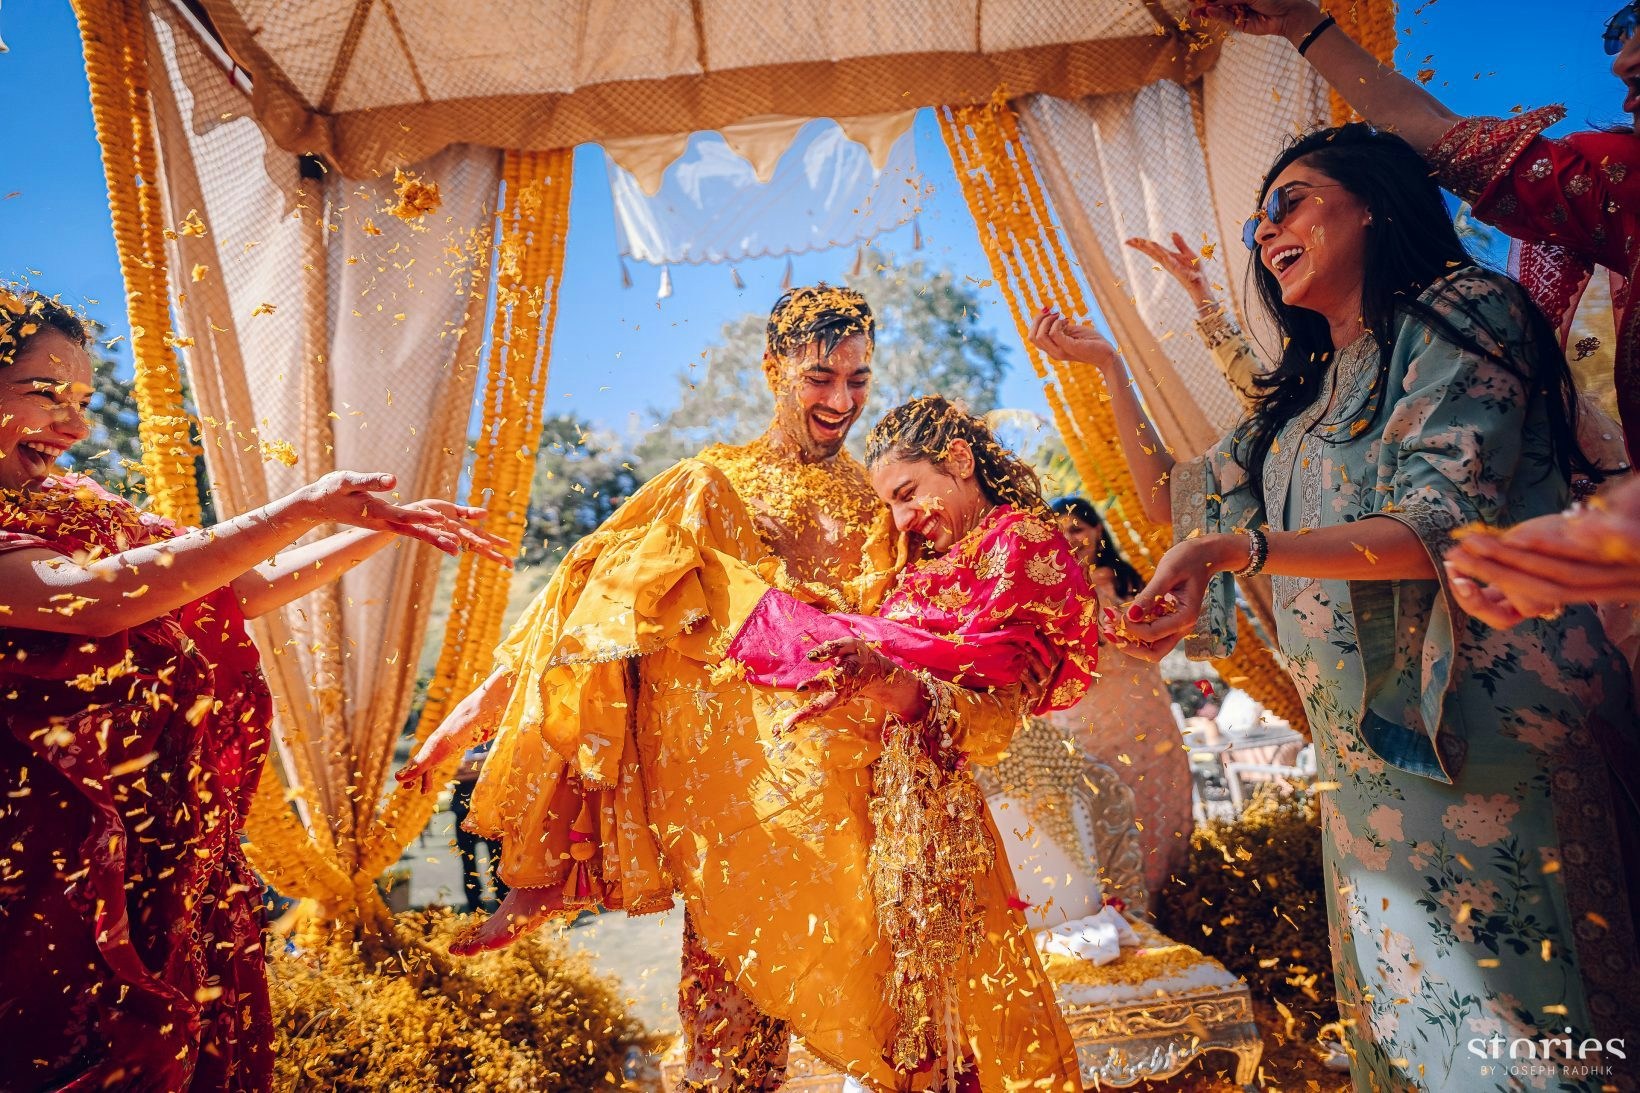 India: The colossal rise of the wedding industry of the ultra-rich